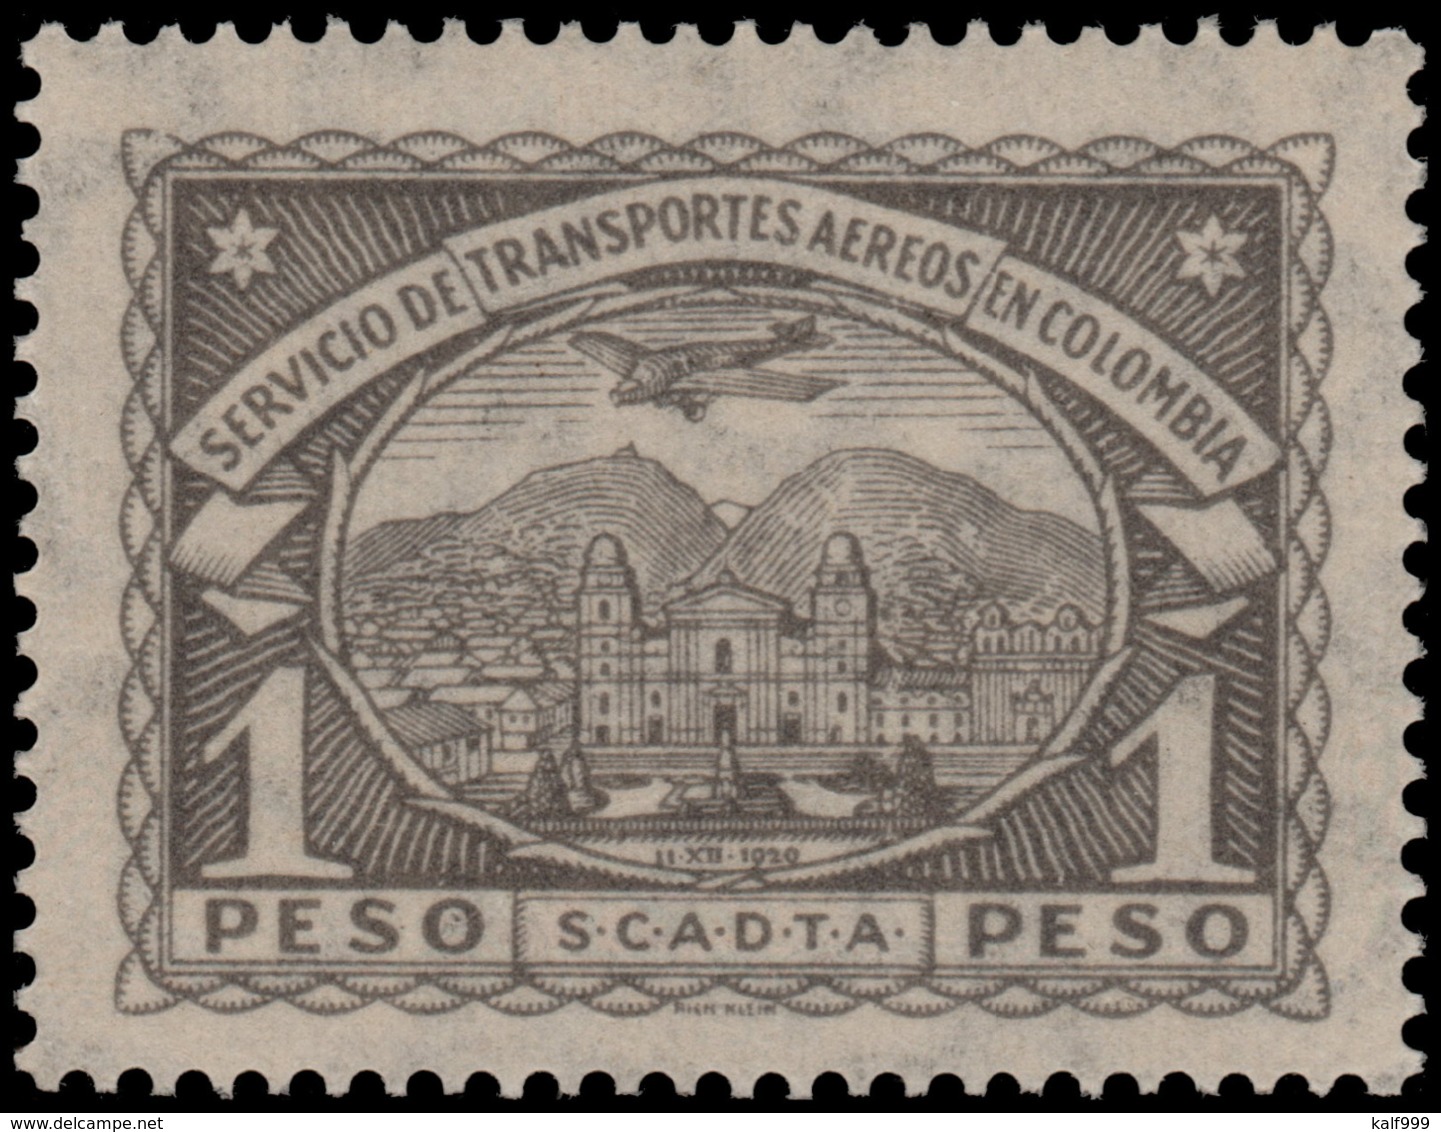 ~~~ Colombia Colombie 1923 - SCADTA - 1 Peso Gris - Mi. 36 ** MNH - Depart 1 Euro ~~~ - Colombia